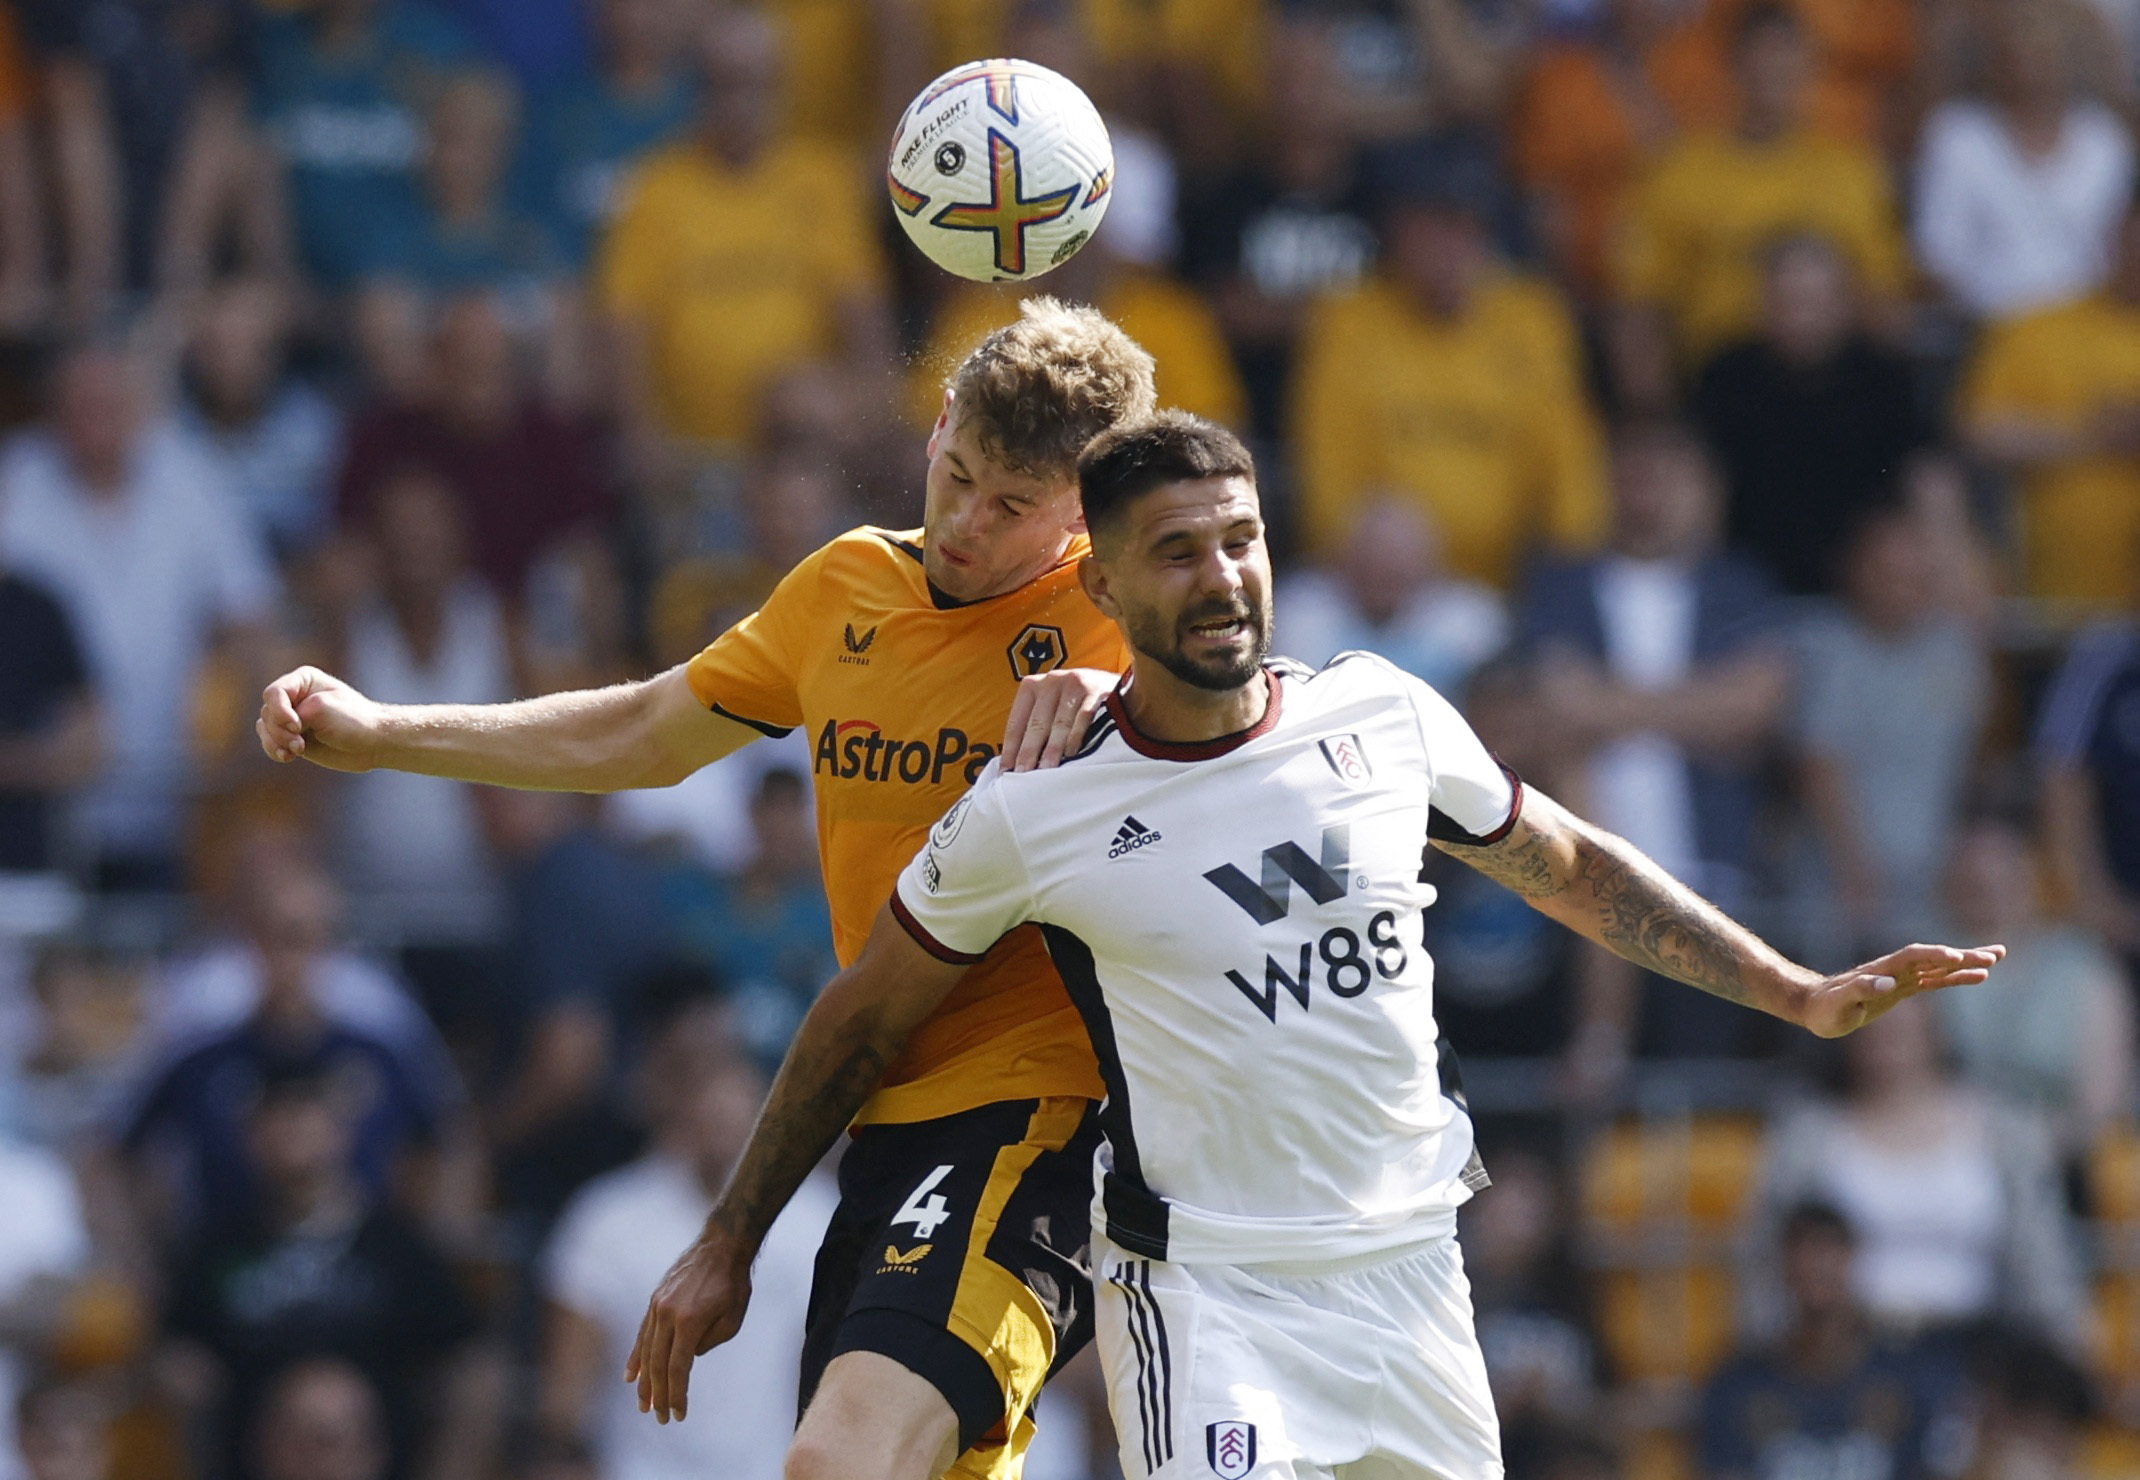 Fulham's Mitrovic sees penalty saved in Wolves stalemate | Reuters